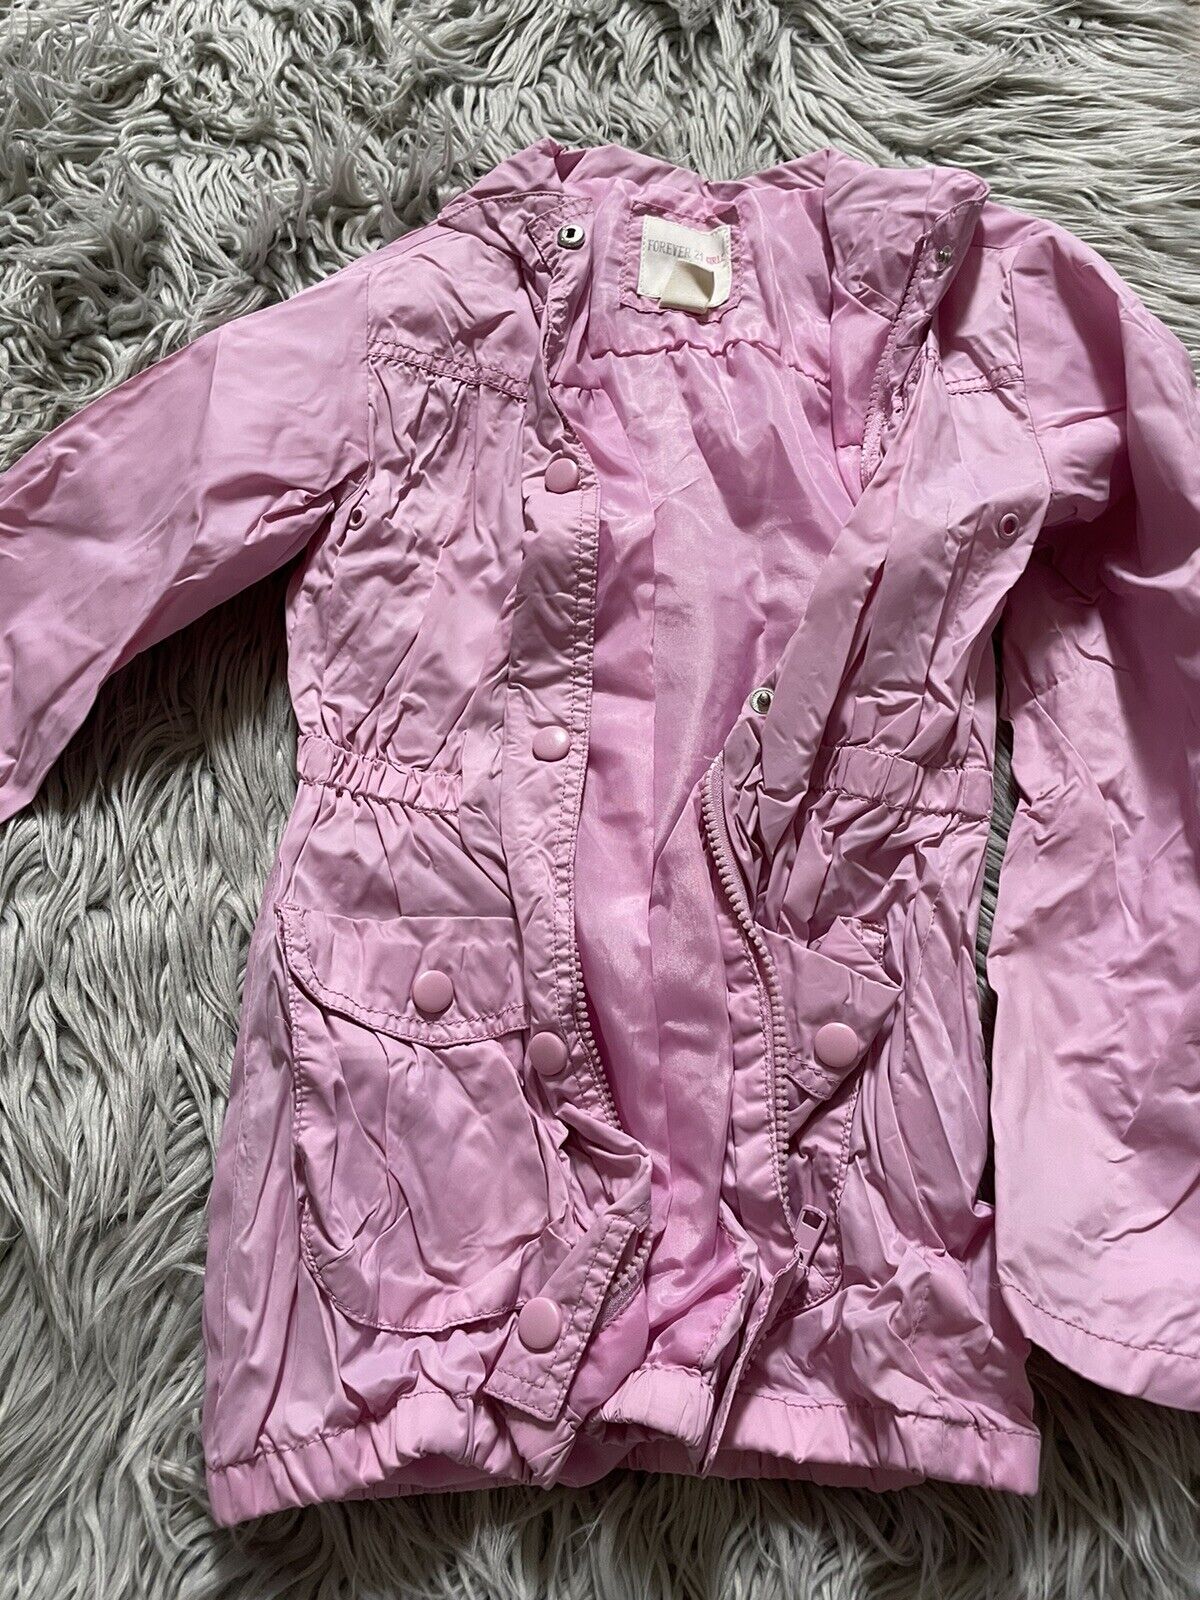 Girls Free shipping anywhere in the nation pink Regular discount forever 21 size small jacket